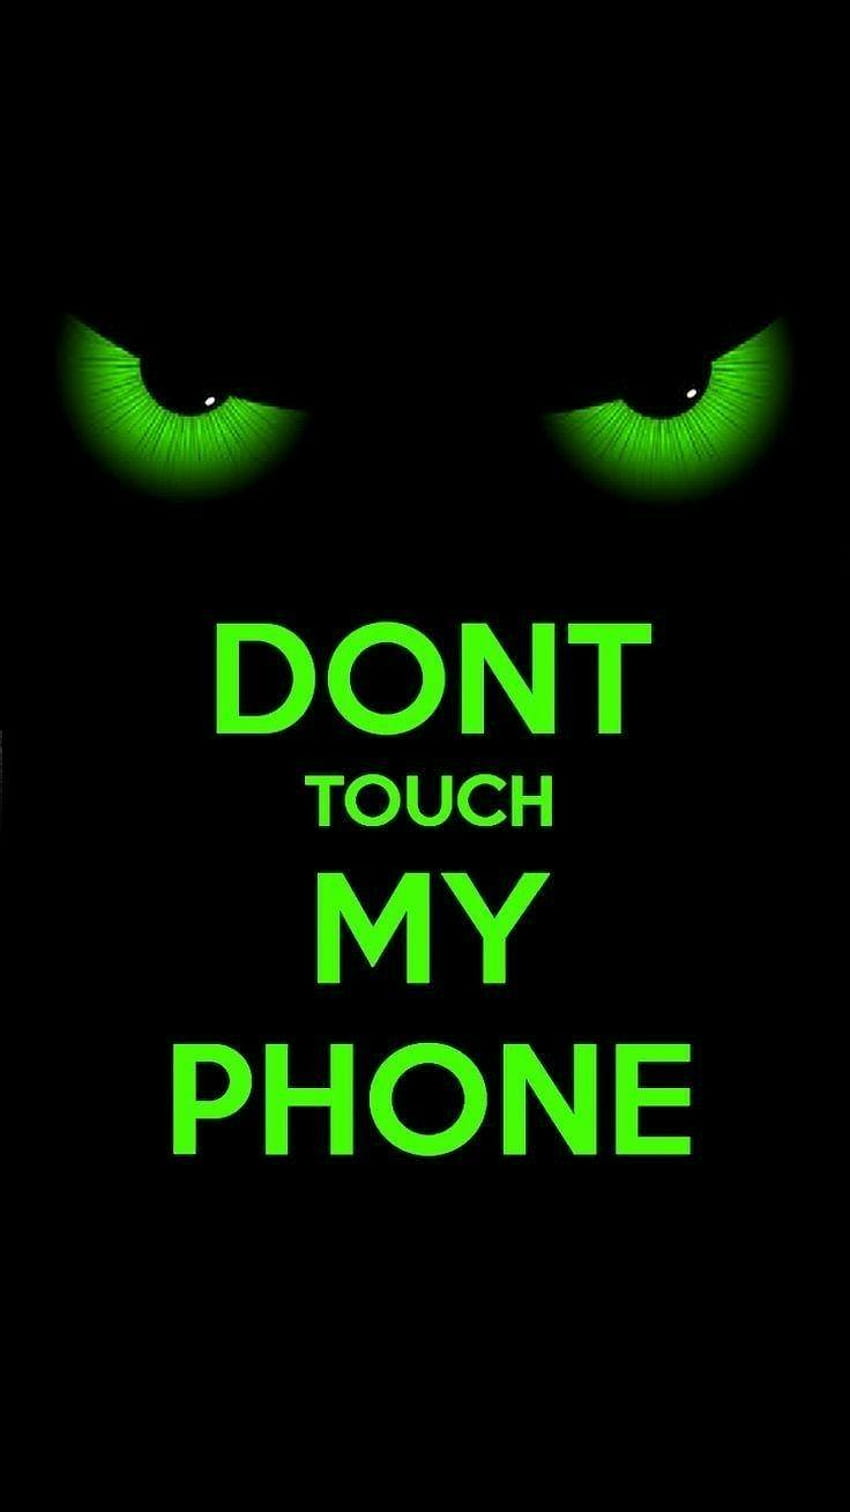 Don't touch me, best for my phone에 있는 핀 HD 전화 배경 화면